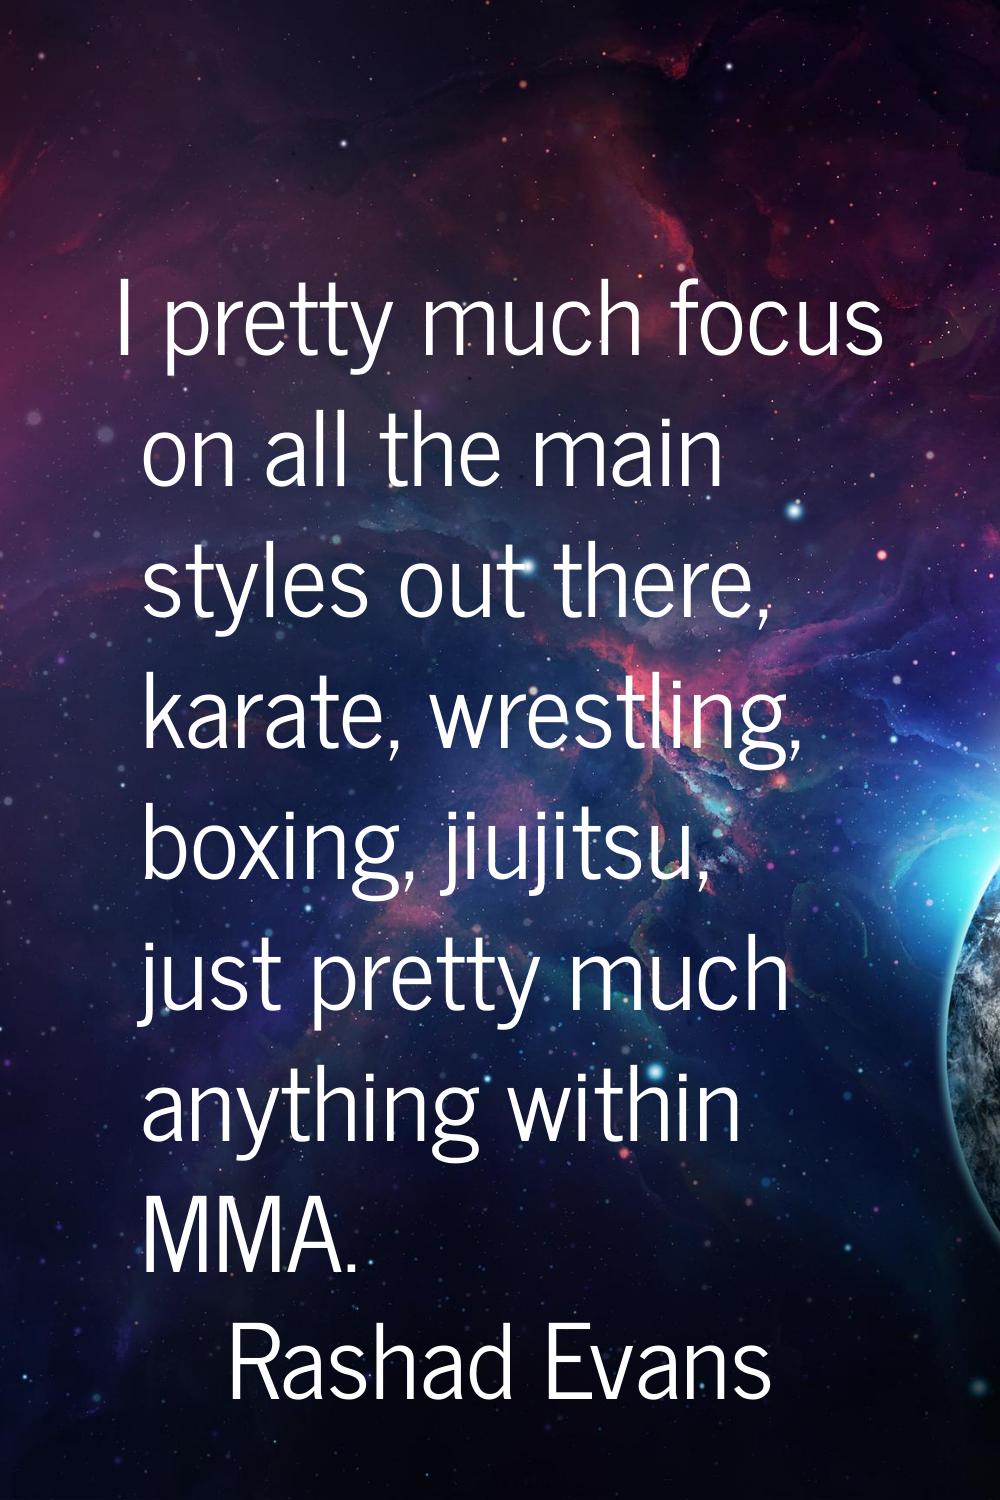 I pretty much focus on all the main styles out there, karate, wrestling, boxing, jiujitsu, just pre